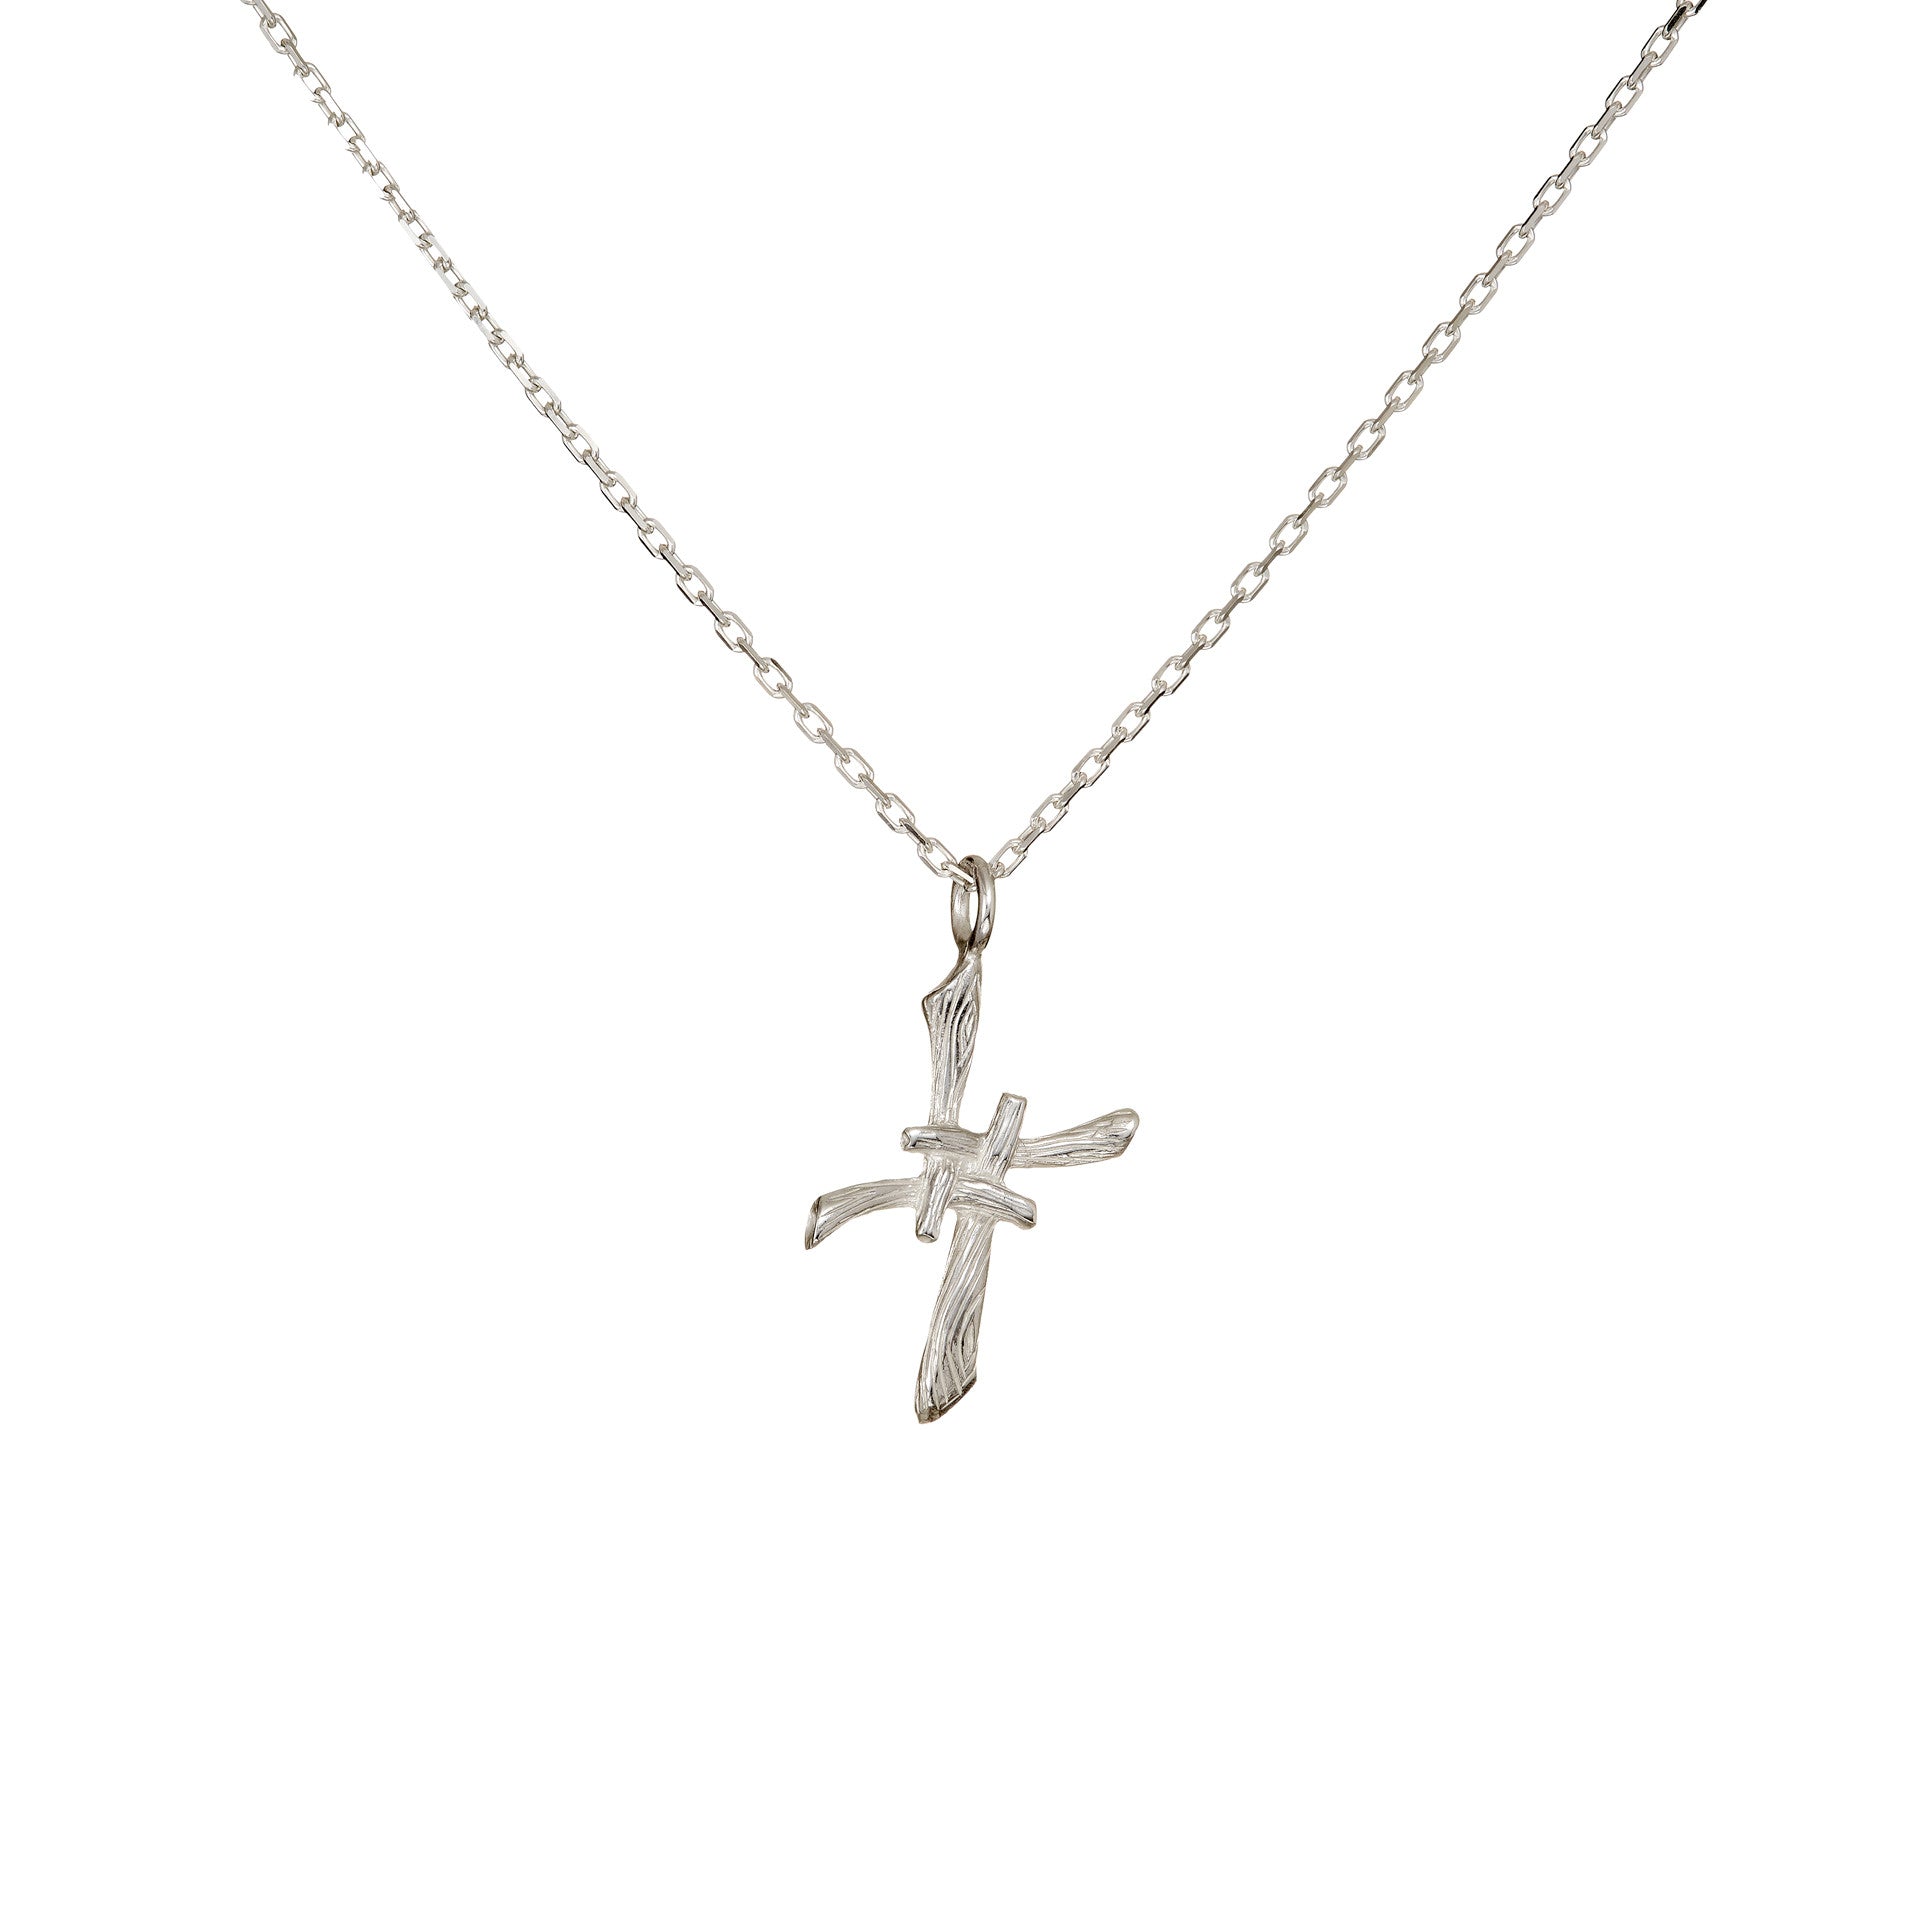 St. Bridget's Cross Pendant, Sterling Silver Irish Jewellery a suitable gift for him or her! The perfect communion and confirmation necklace.